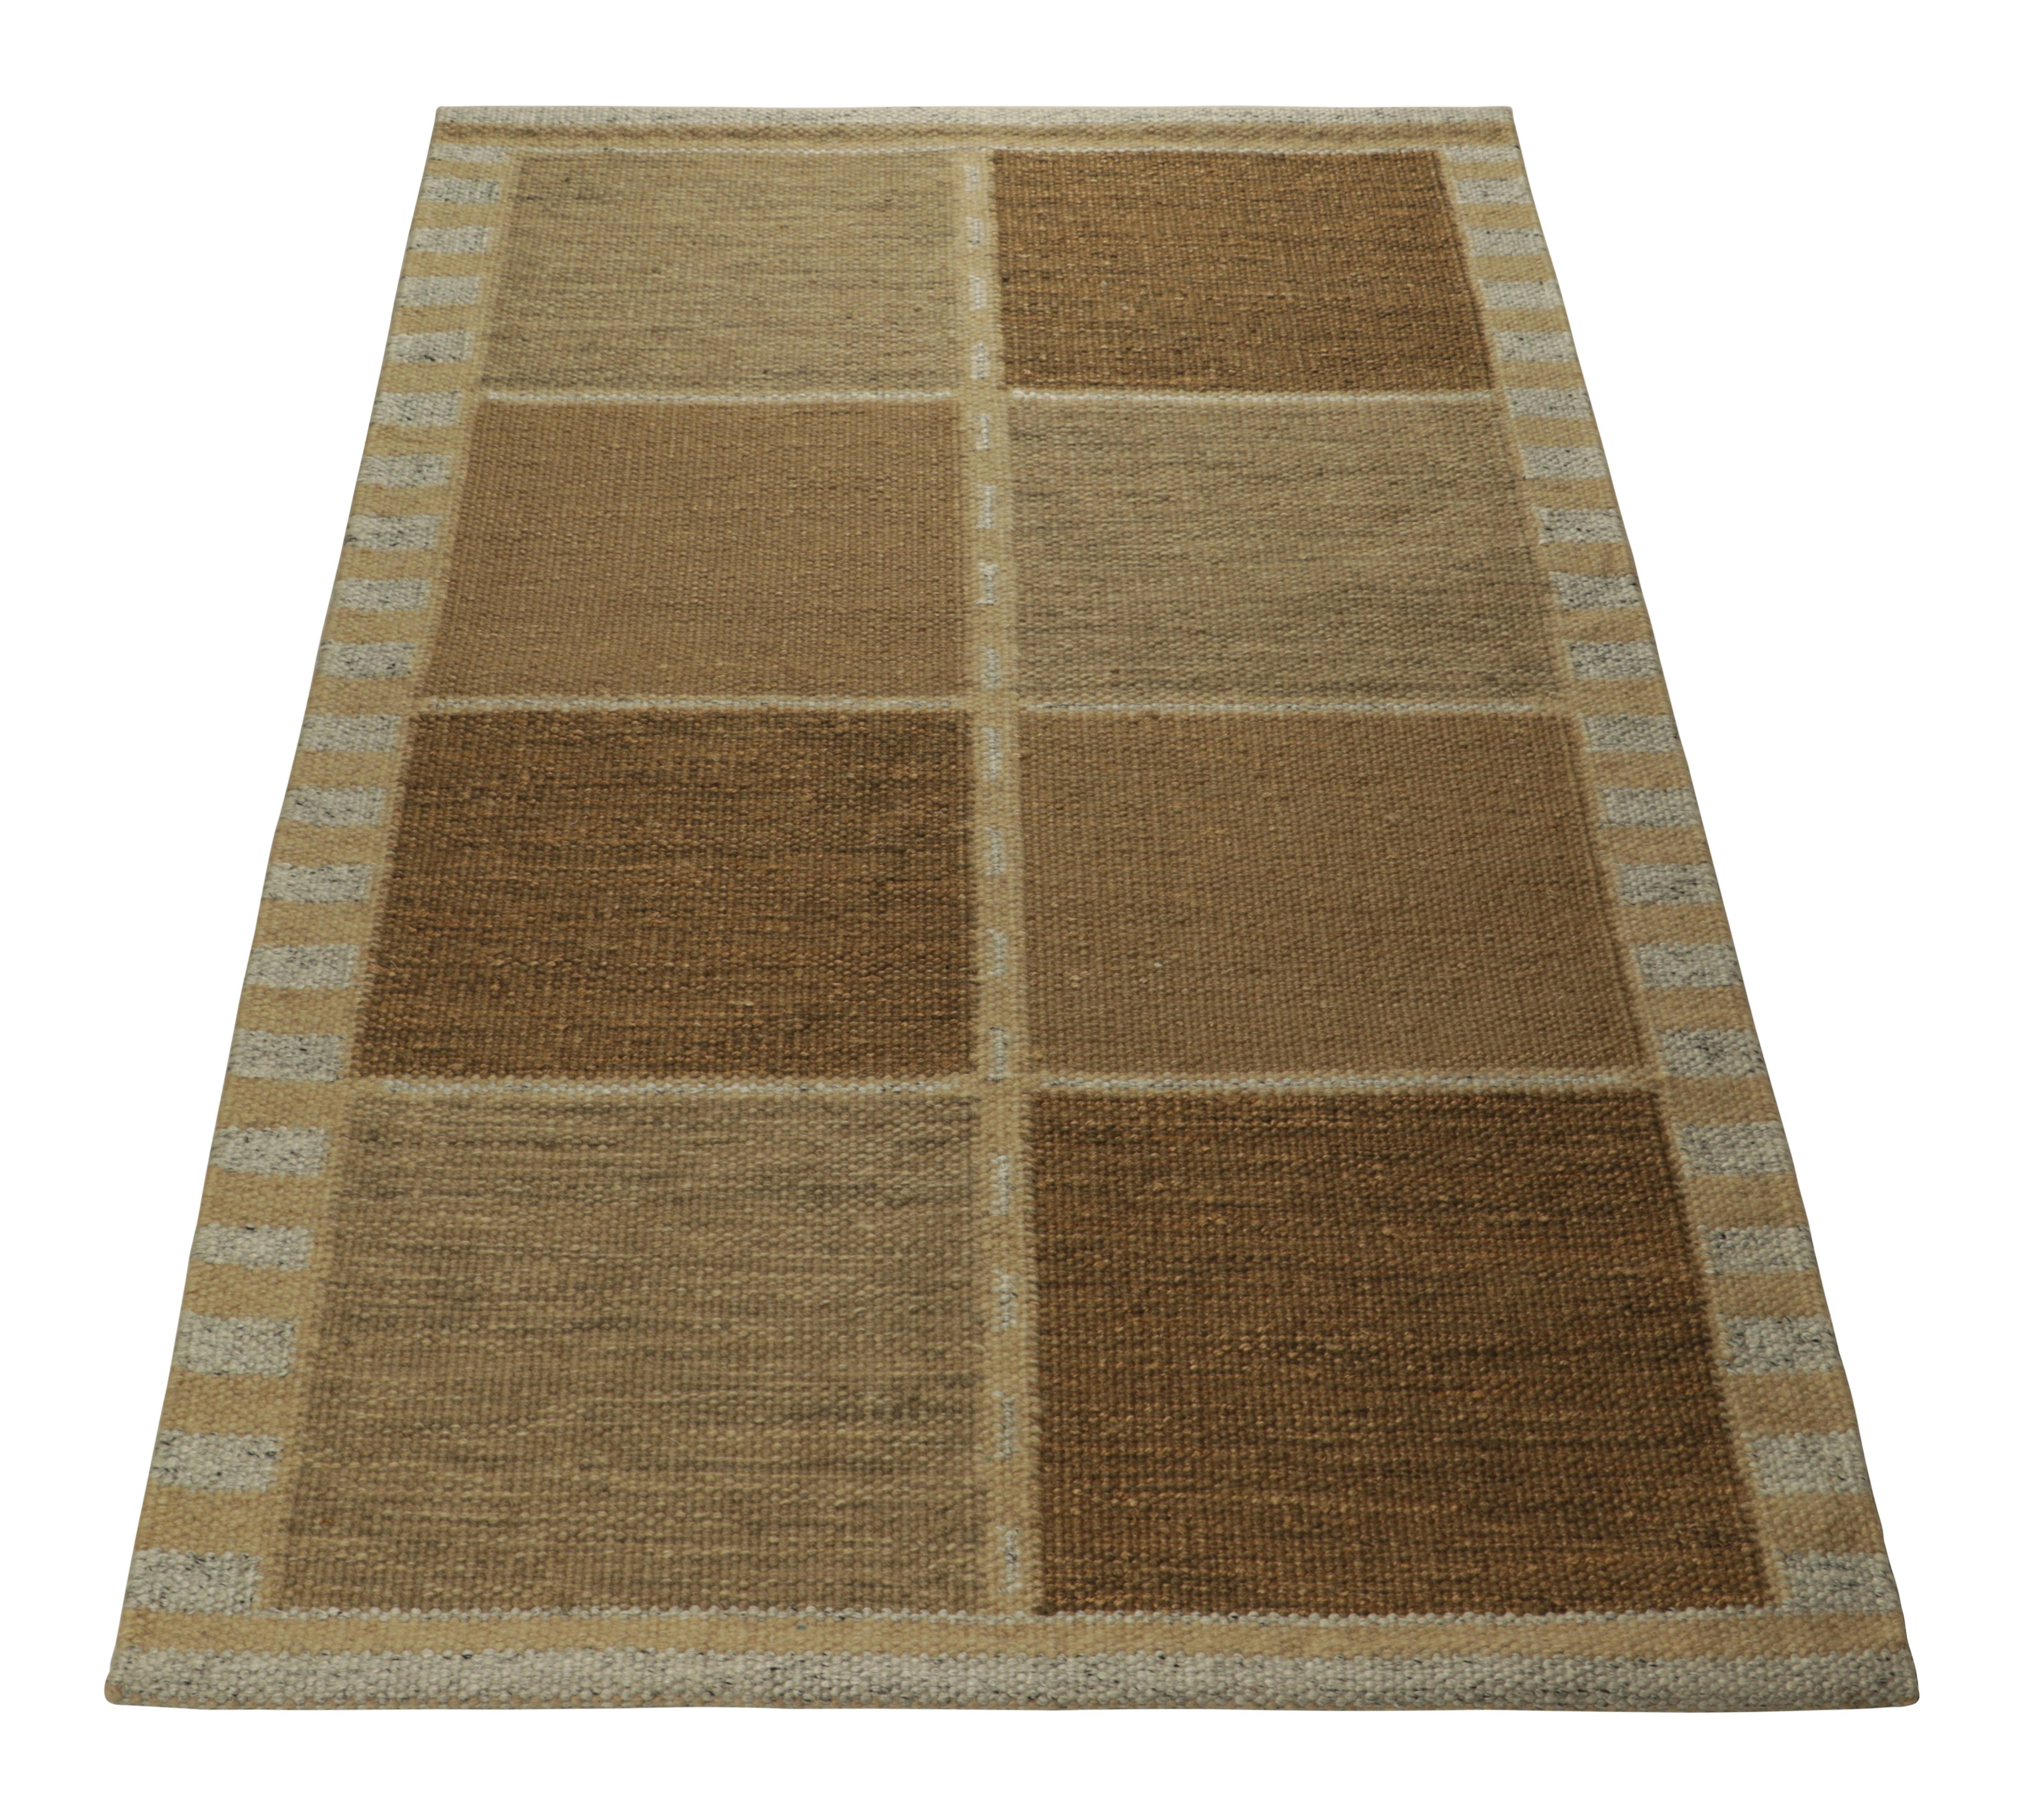 Indian Rug & Kilim’s Scandinavian Style Rug in Beige-Brown, with Blue Geometric Pattern For Sale